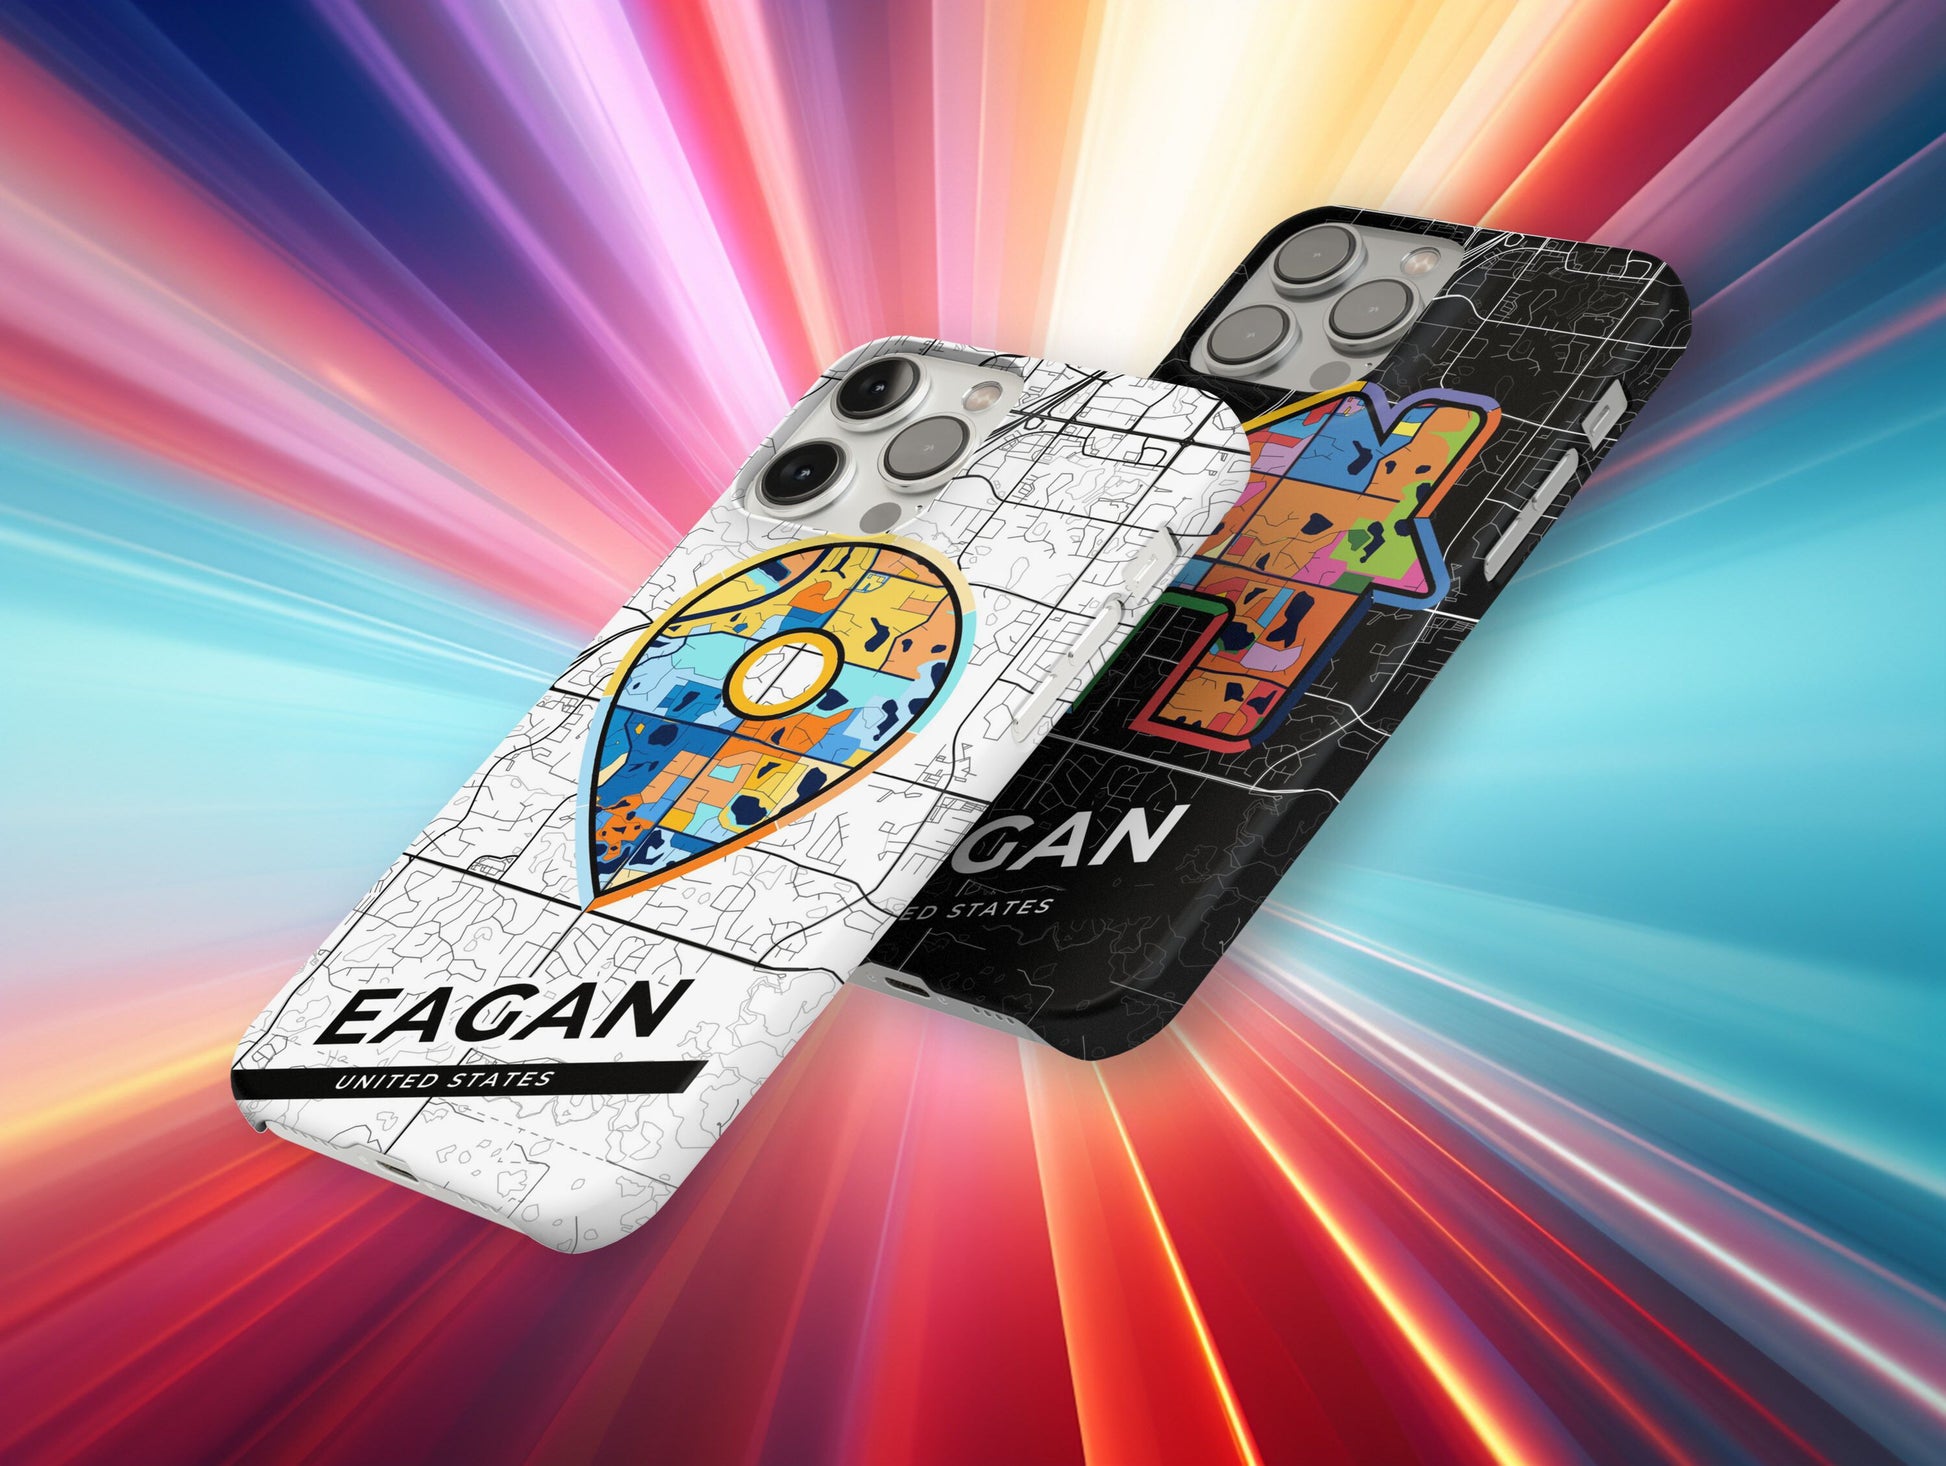 Eagan Minnesota slim phone case with colorful icon. Birthday, wedding or housewarming gift. Couple match cases.